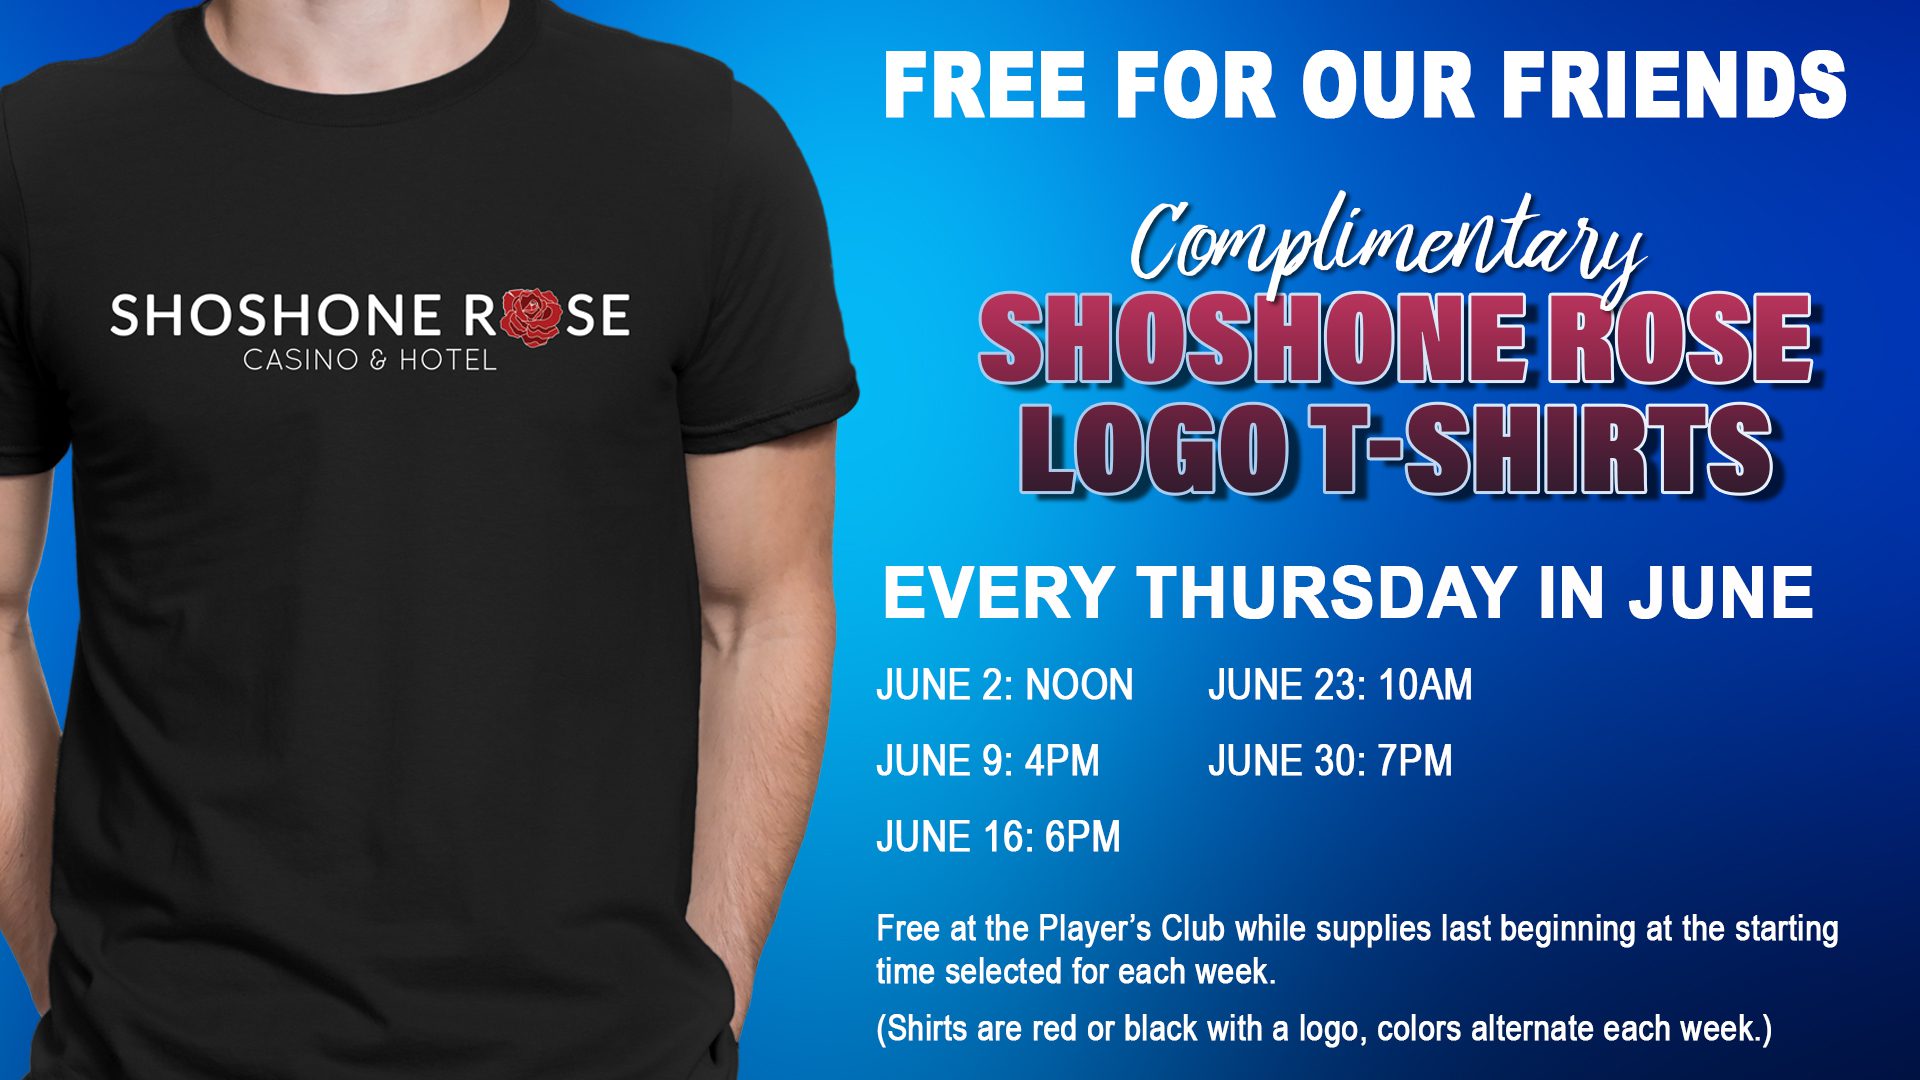 Promotional graphic for complimentary shoshone rose casino & hotel logo t-shirts available every thursday in june at specified times.